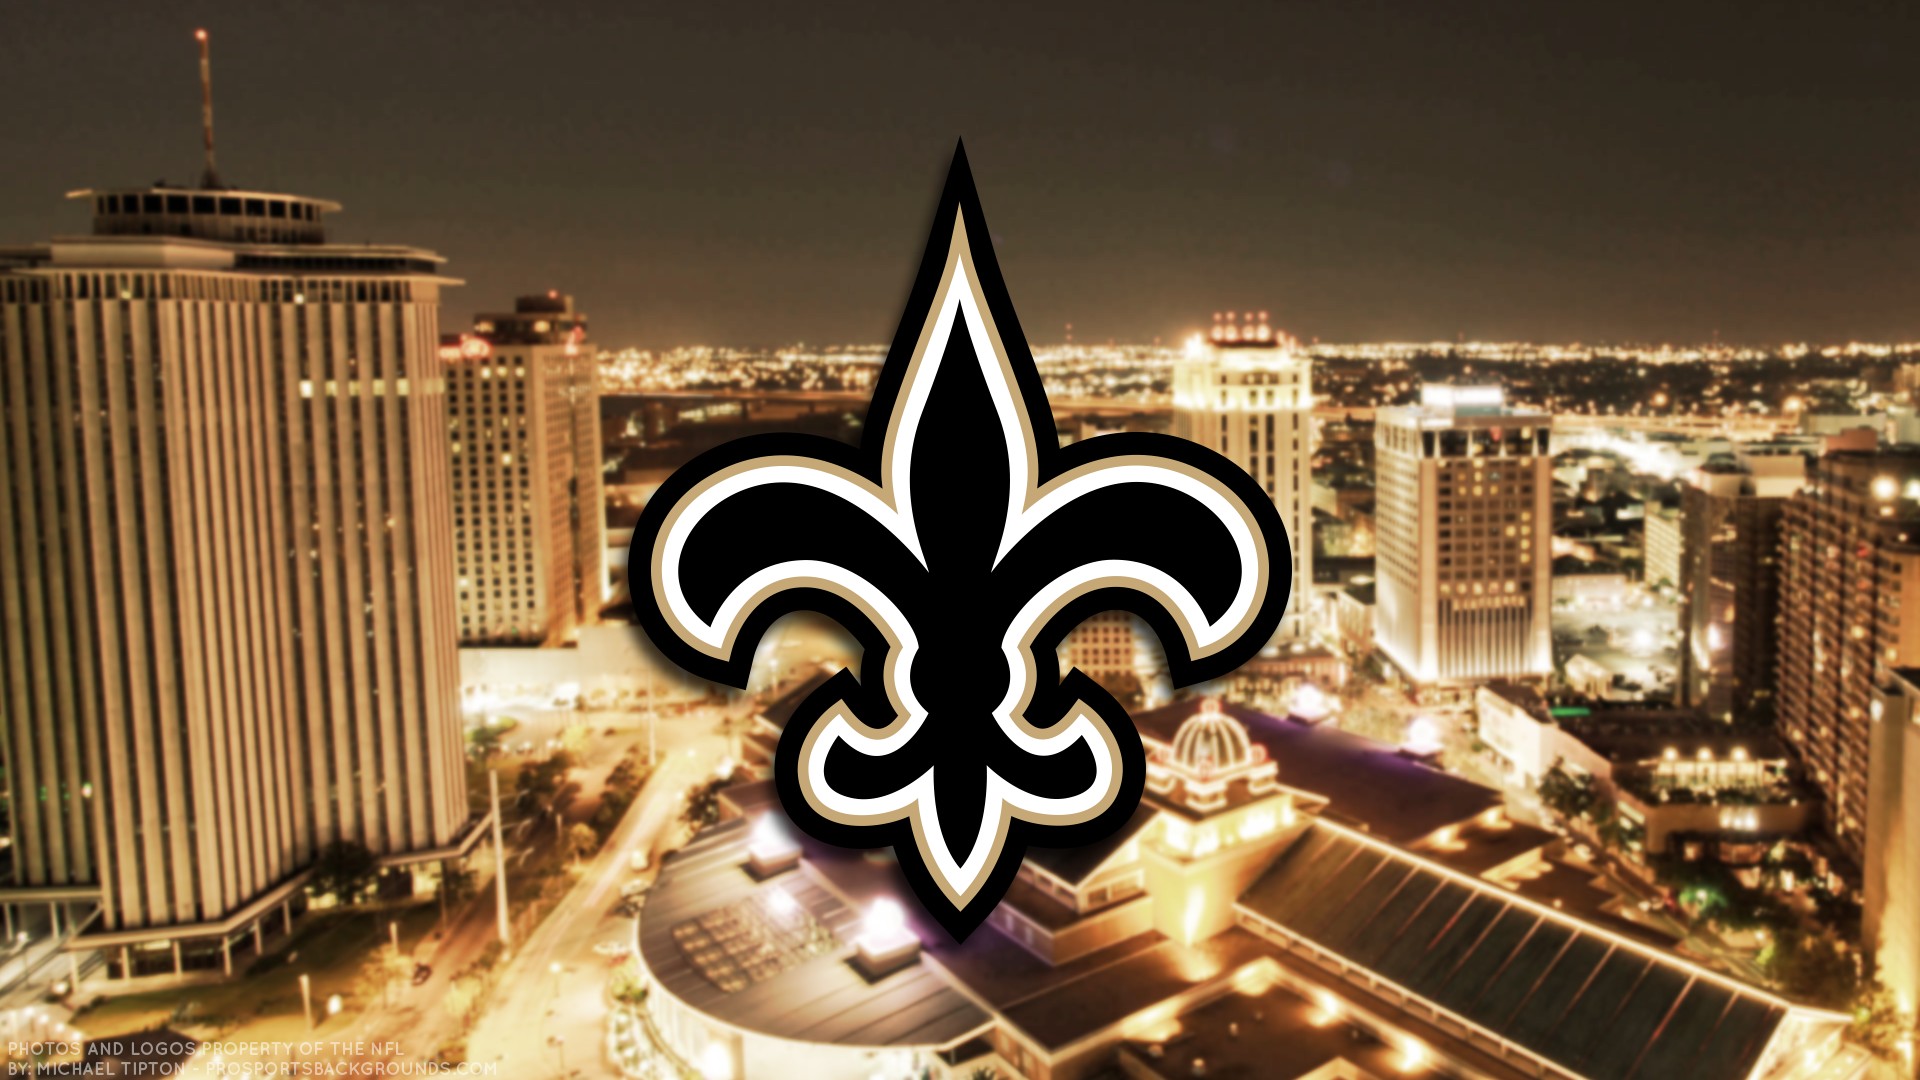 Wallpapers HD New Orleans Saints With Resolution 1920X1080 pixel. You can make this wallpaper for your Mac or Windows Desktop Background, iPhone, Android or Tablet and another Smartphone device for free